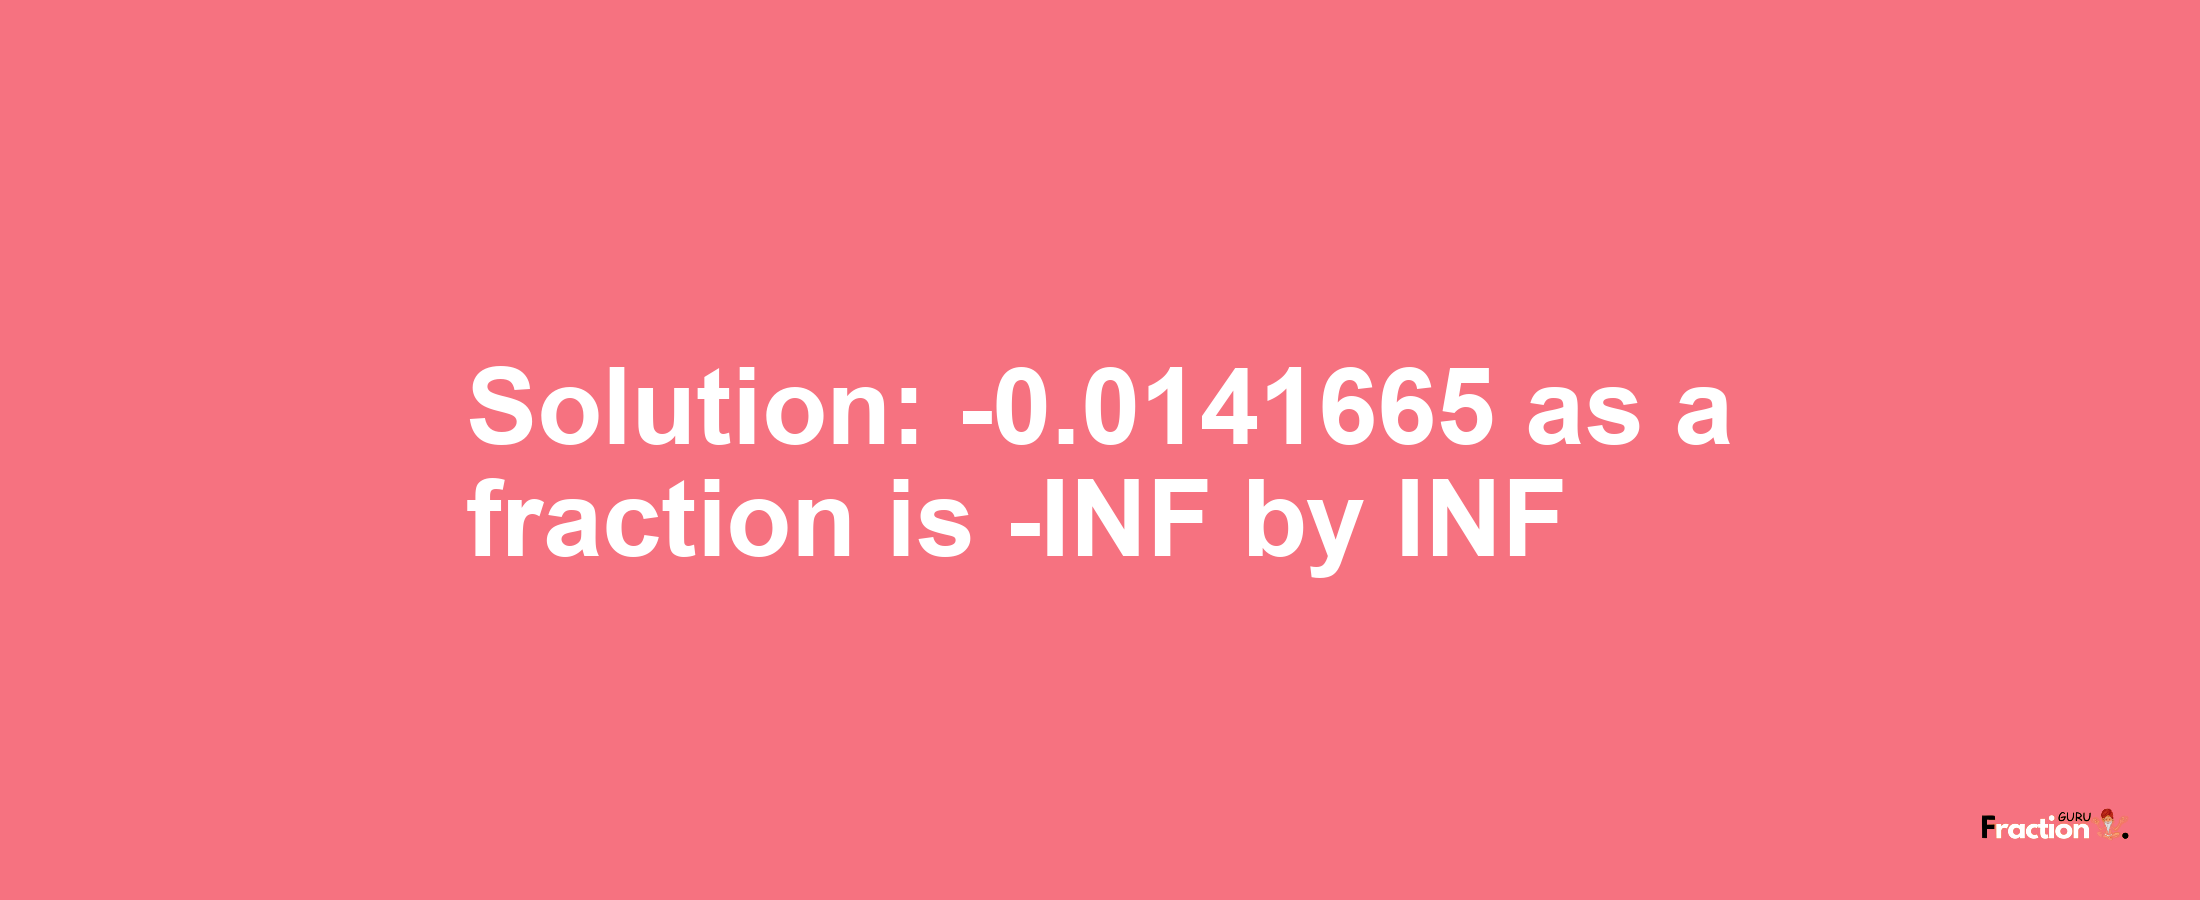 Solution:-0.0141665 as a fraction is -INF/INF